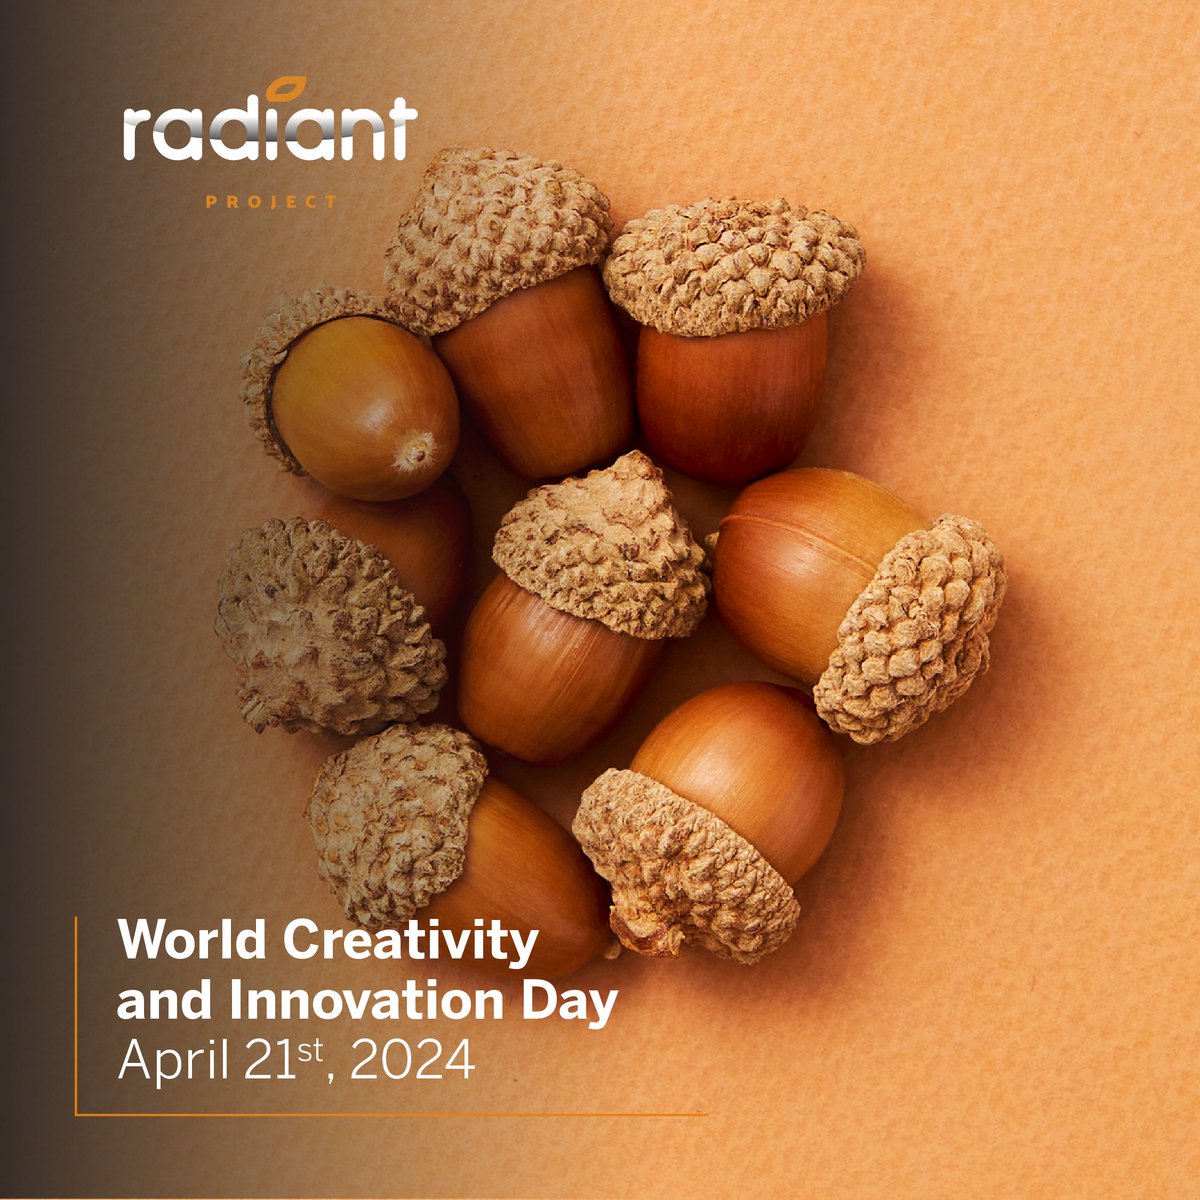 Today, we want to congratulate our #Radiant community on their innovative thinking and solutions! 💡 Together, we can solve every problem that we are faced with and build a better, more sustainable future. #RADIANT #WorldCreativityandInnovationDay #Sustainability #Future